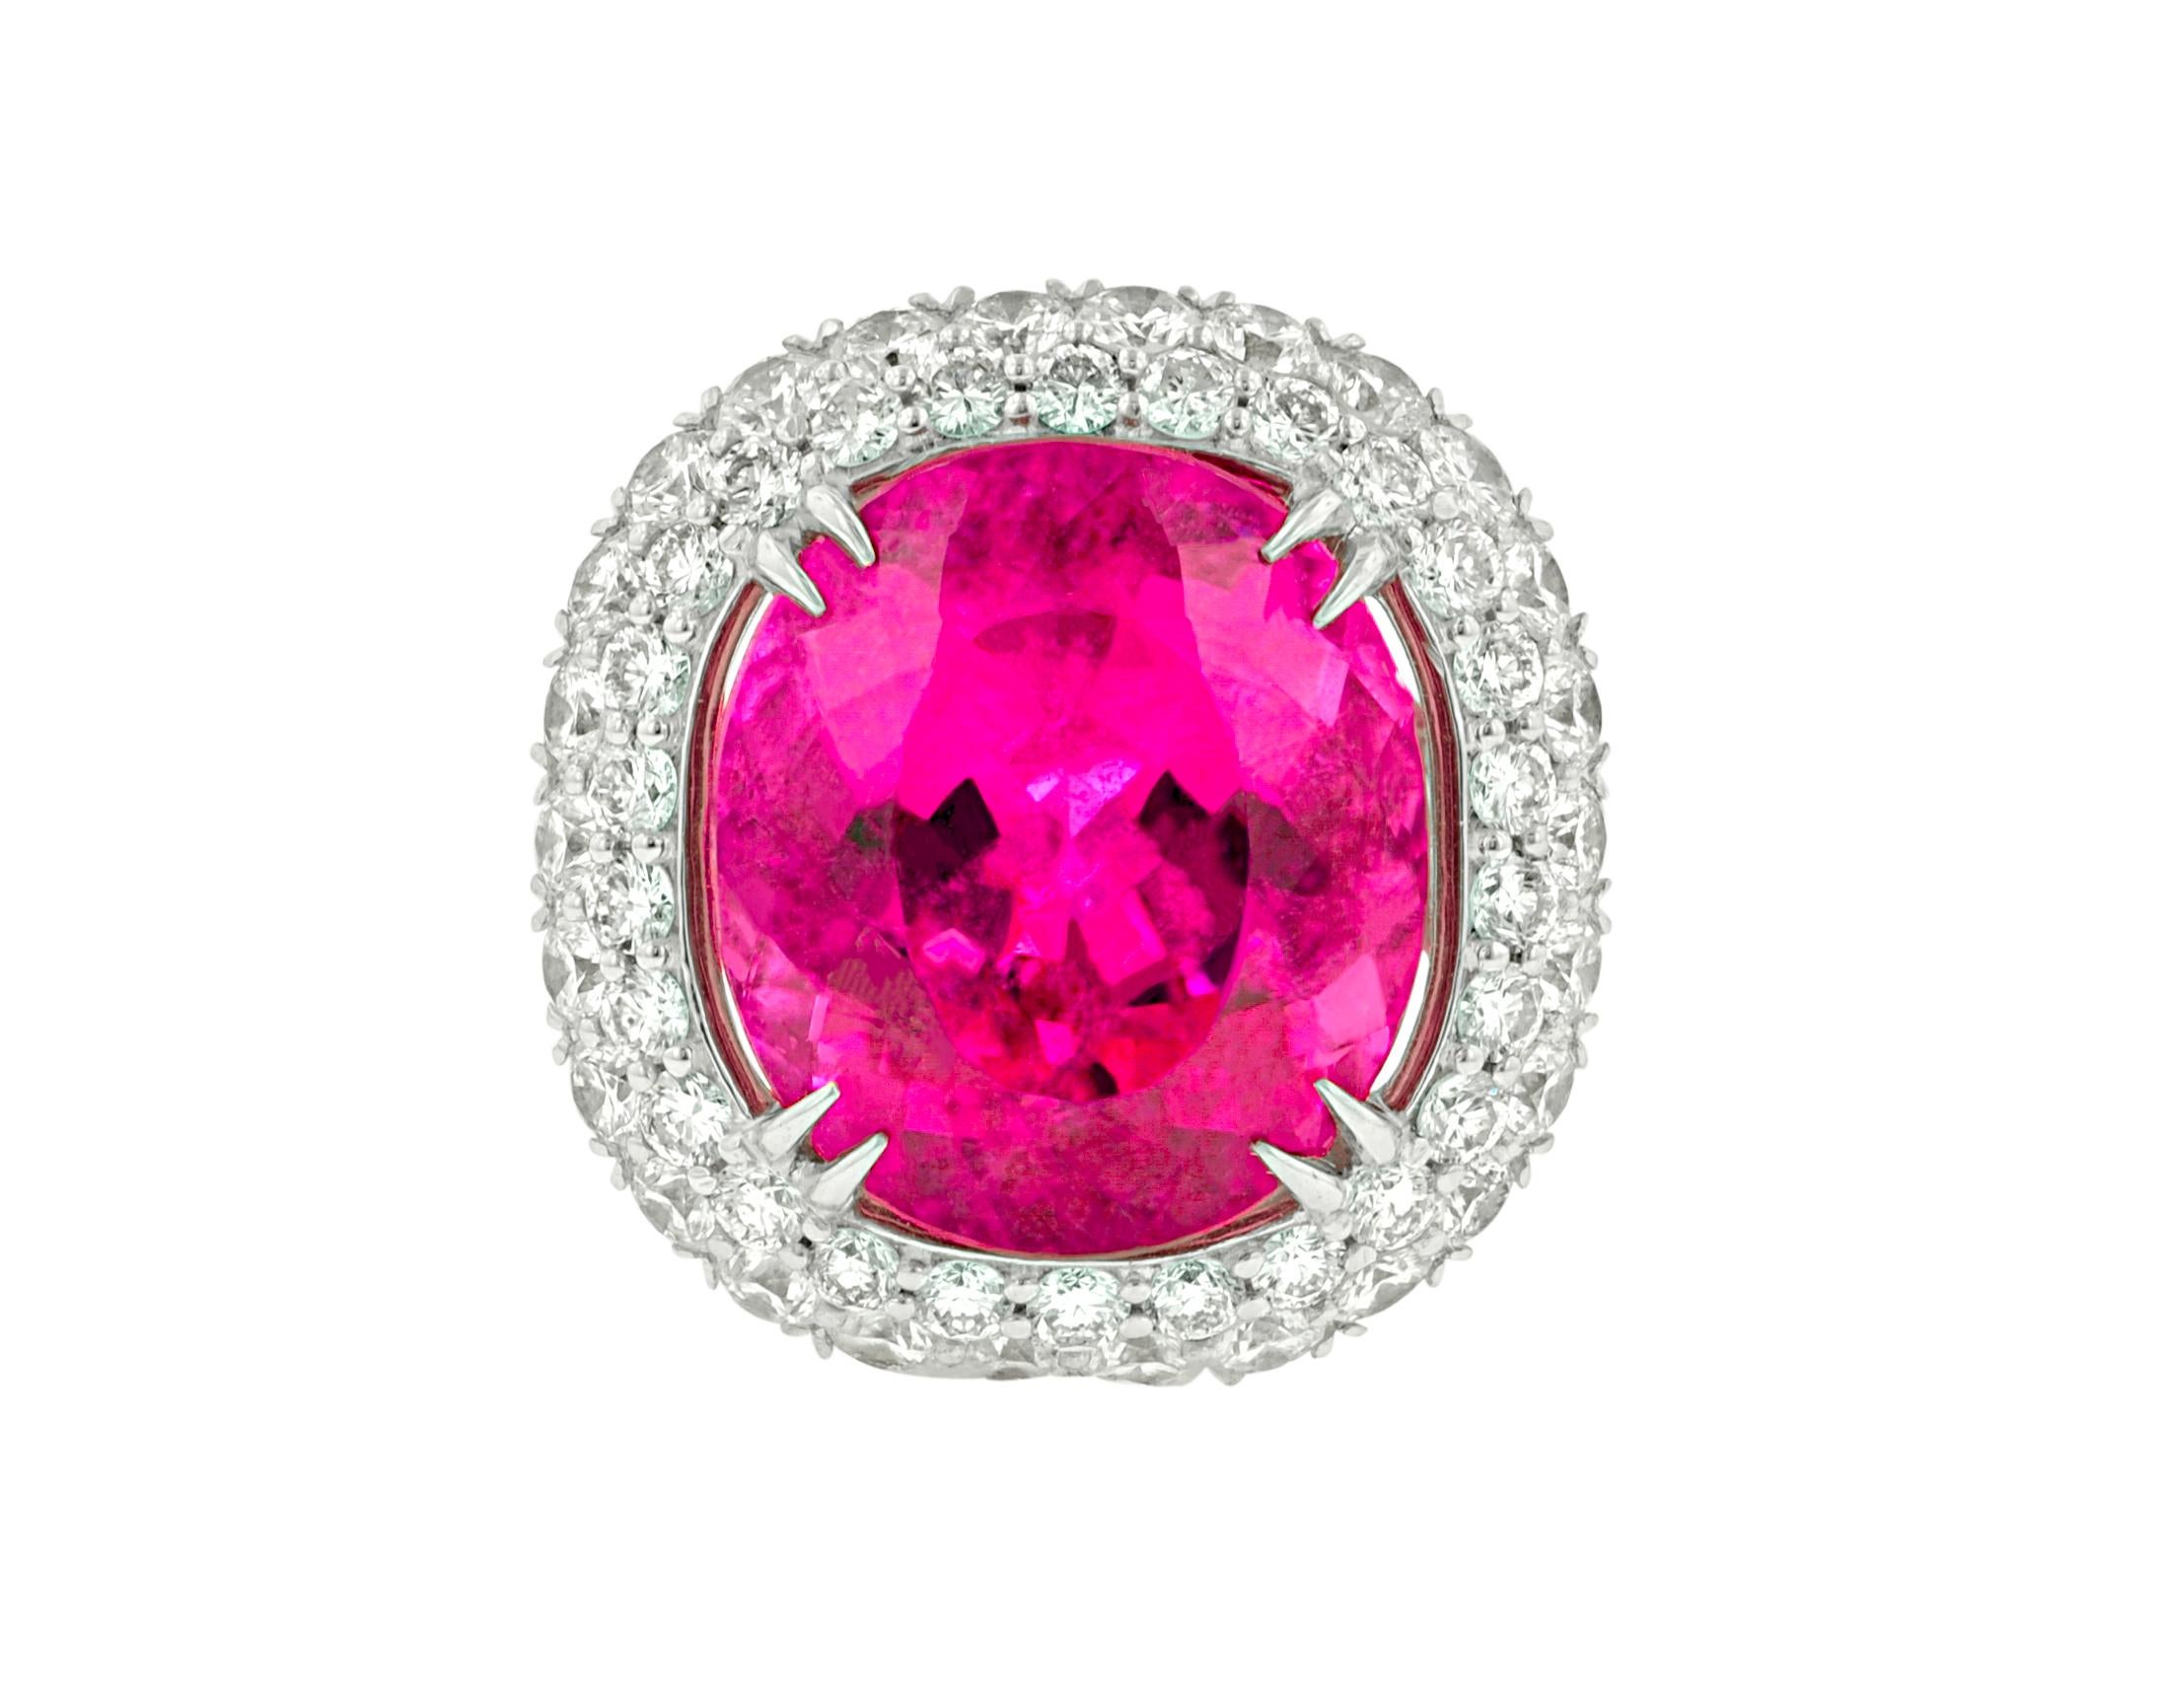 This 18 KT. white gold Intense Tourmaline and Diamond Ring, features 14.87 CT. intense color tourmaline in the center, surrounded by 4 carats of fine color and clarity round brilliant cut diamonds. This is a hand made ring, it was designed by Diana